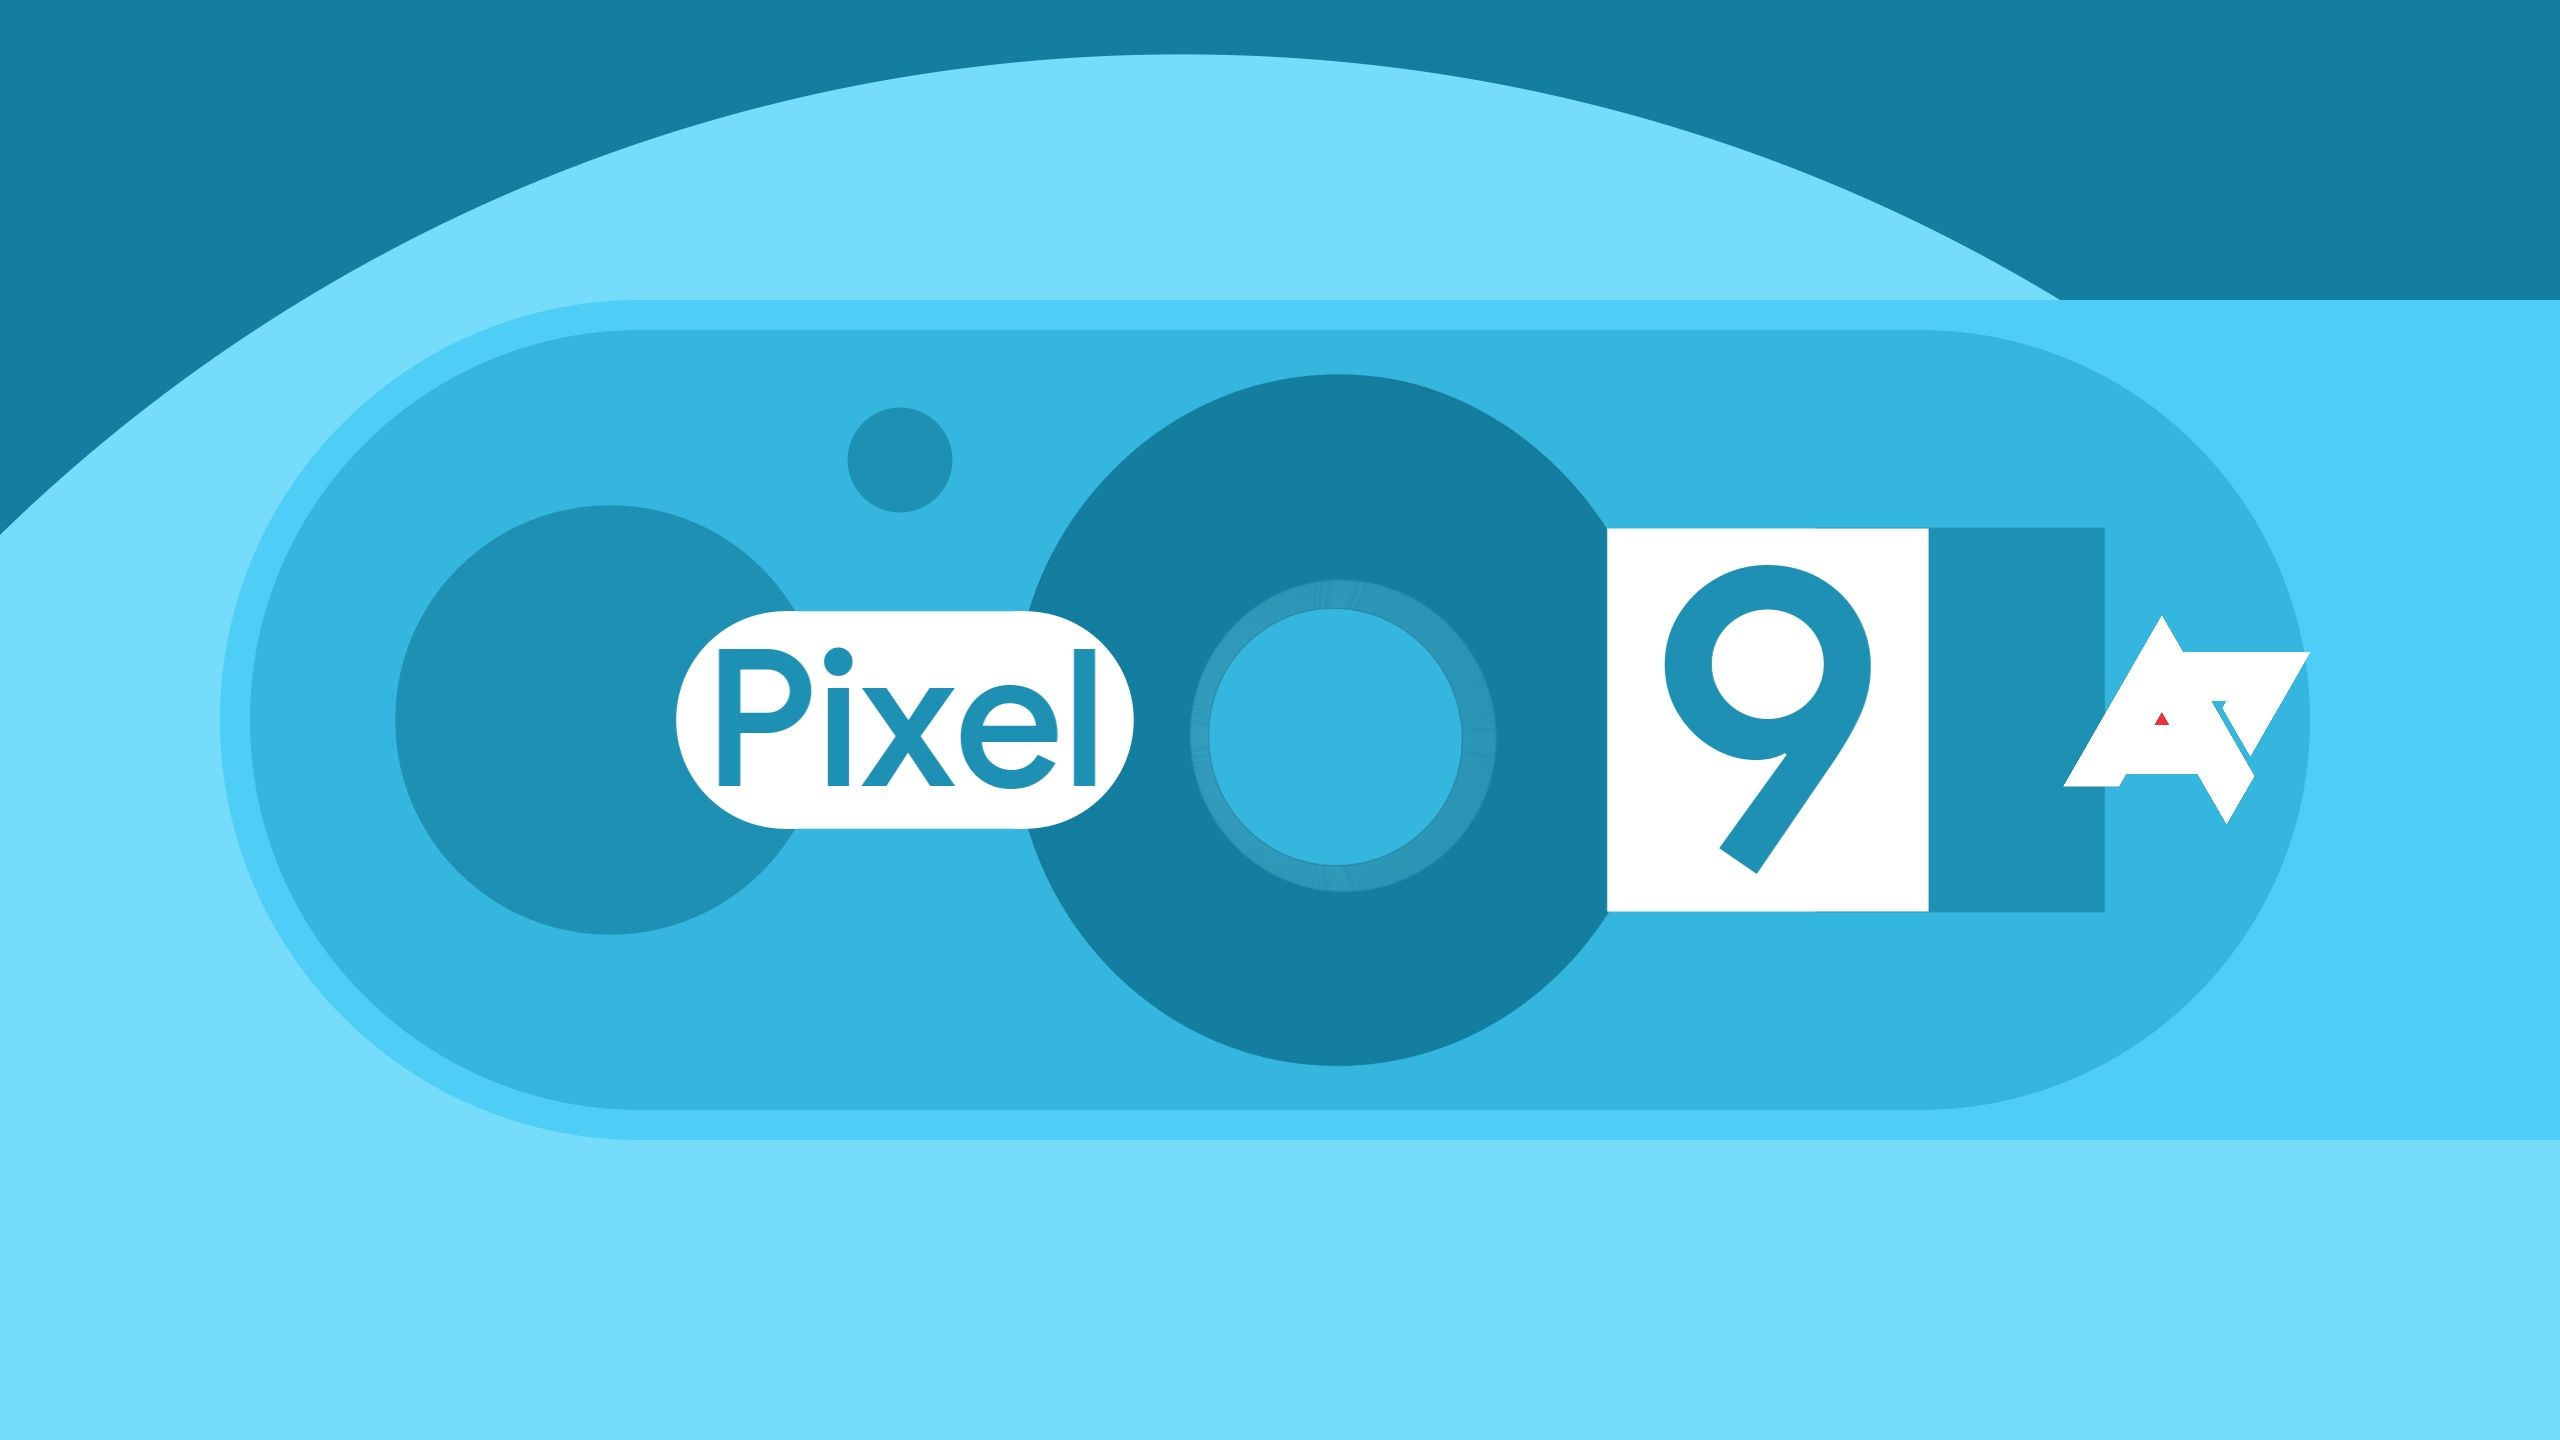 The Pixel 9 Pro XL is a dumb name we shouldn't use, says the Android Police podcast